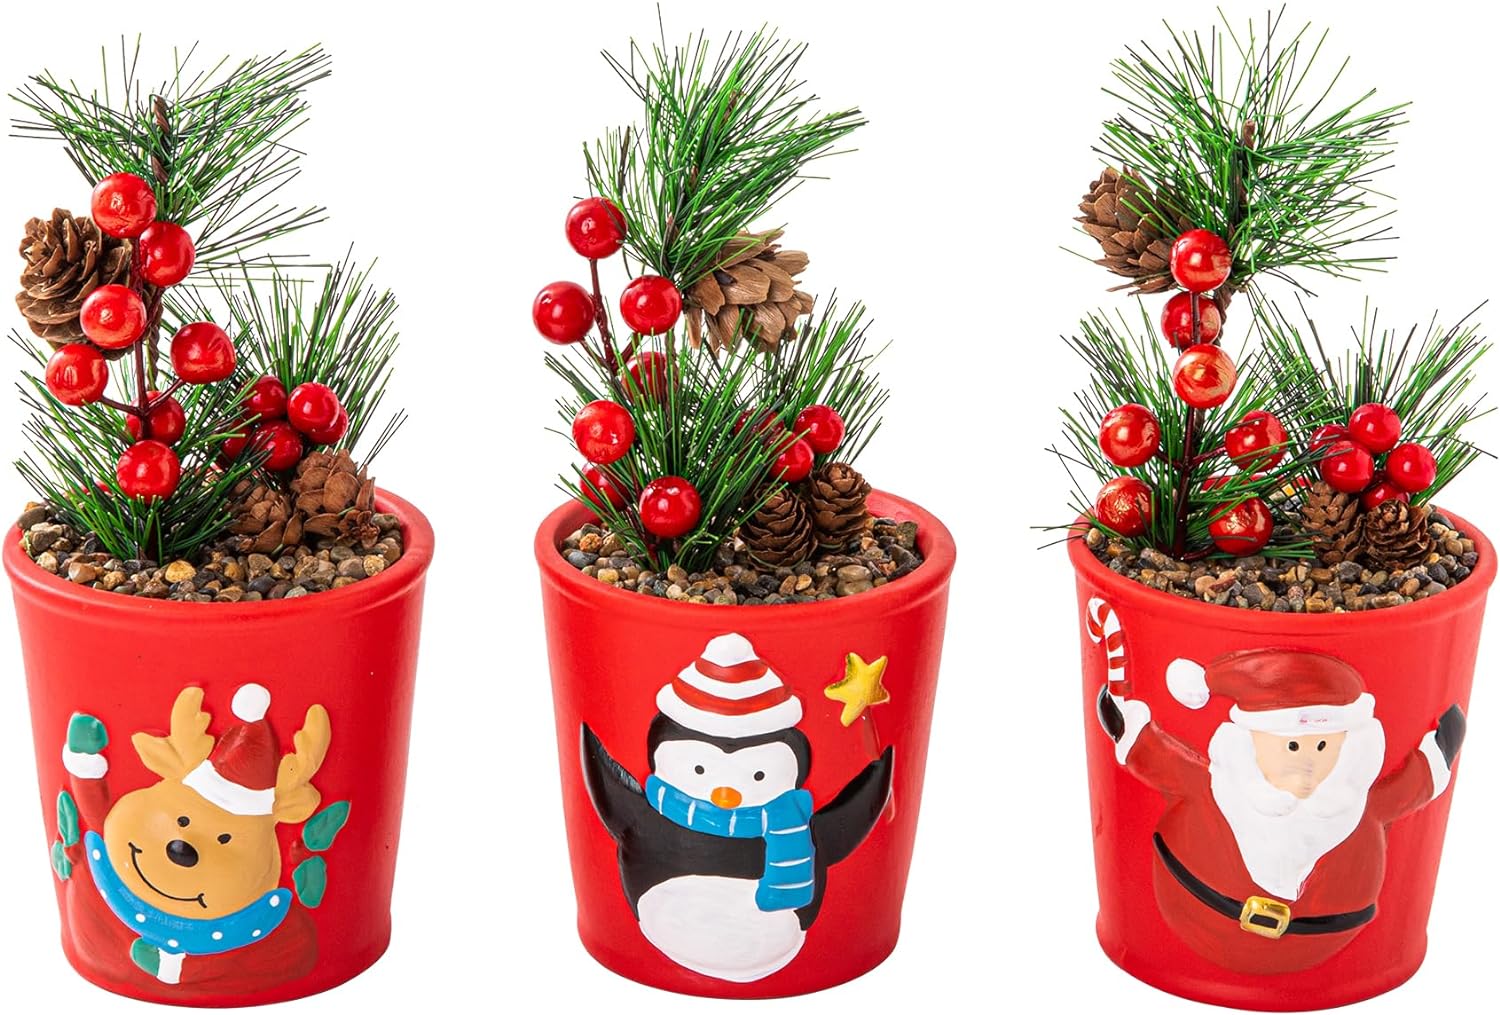 VENY TAYA 3PCS Christmas Santa Claus Plants Decor with Attificial Pine Branches and Red Berries, Indoor Christmas Table Centerpiece Decoration Potted Plants for Home and Office, Mini Christmas Tree